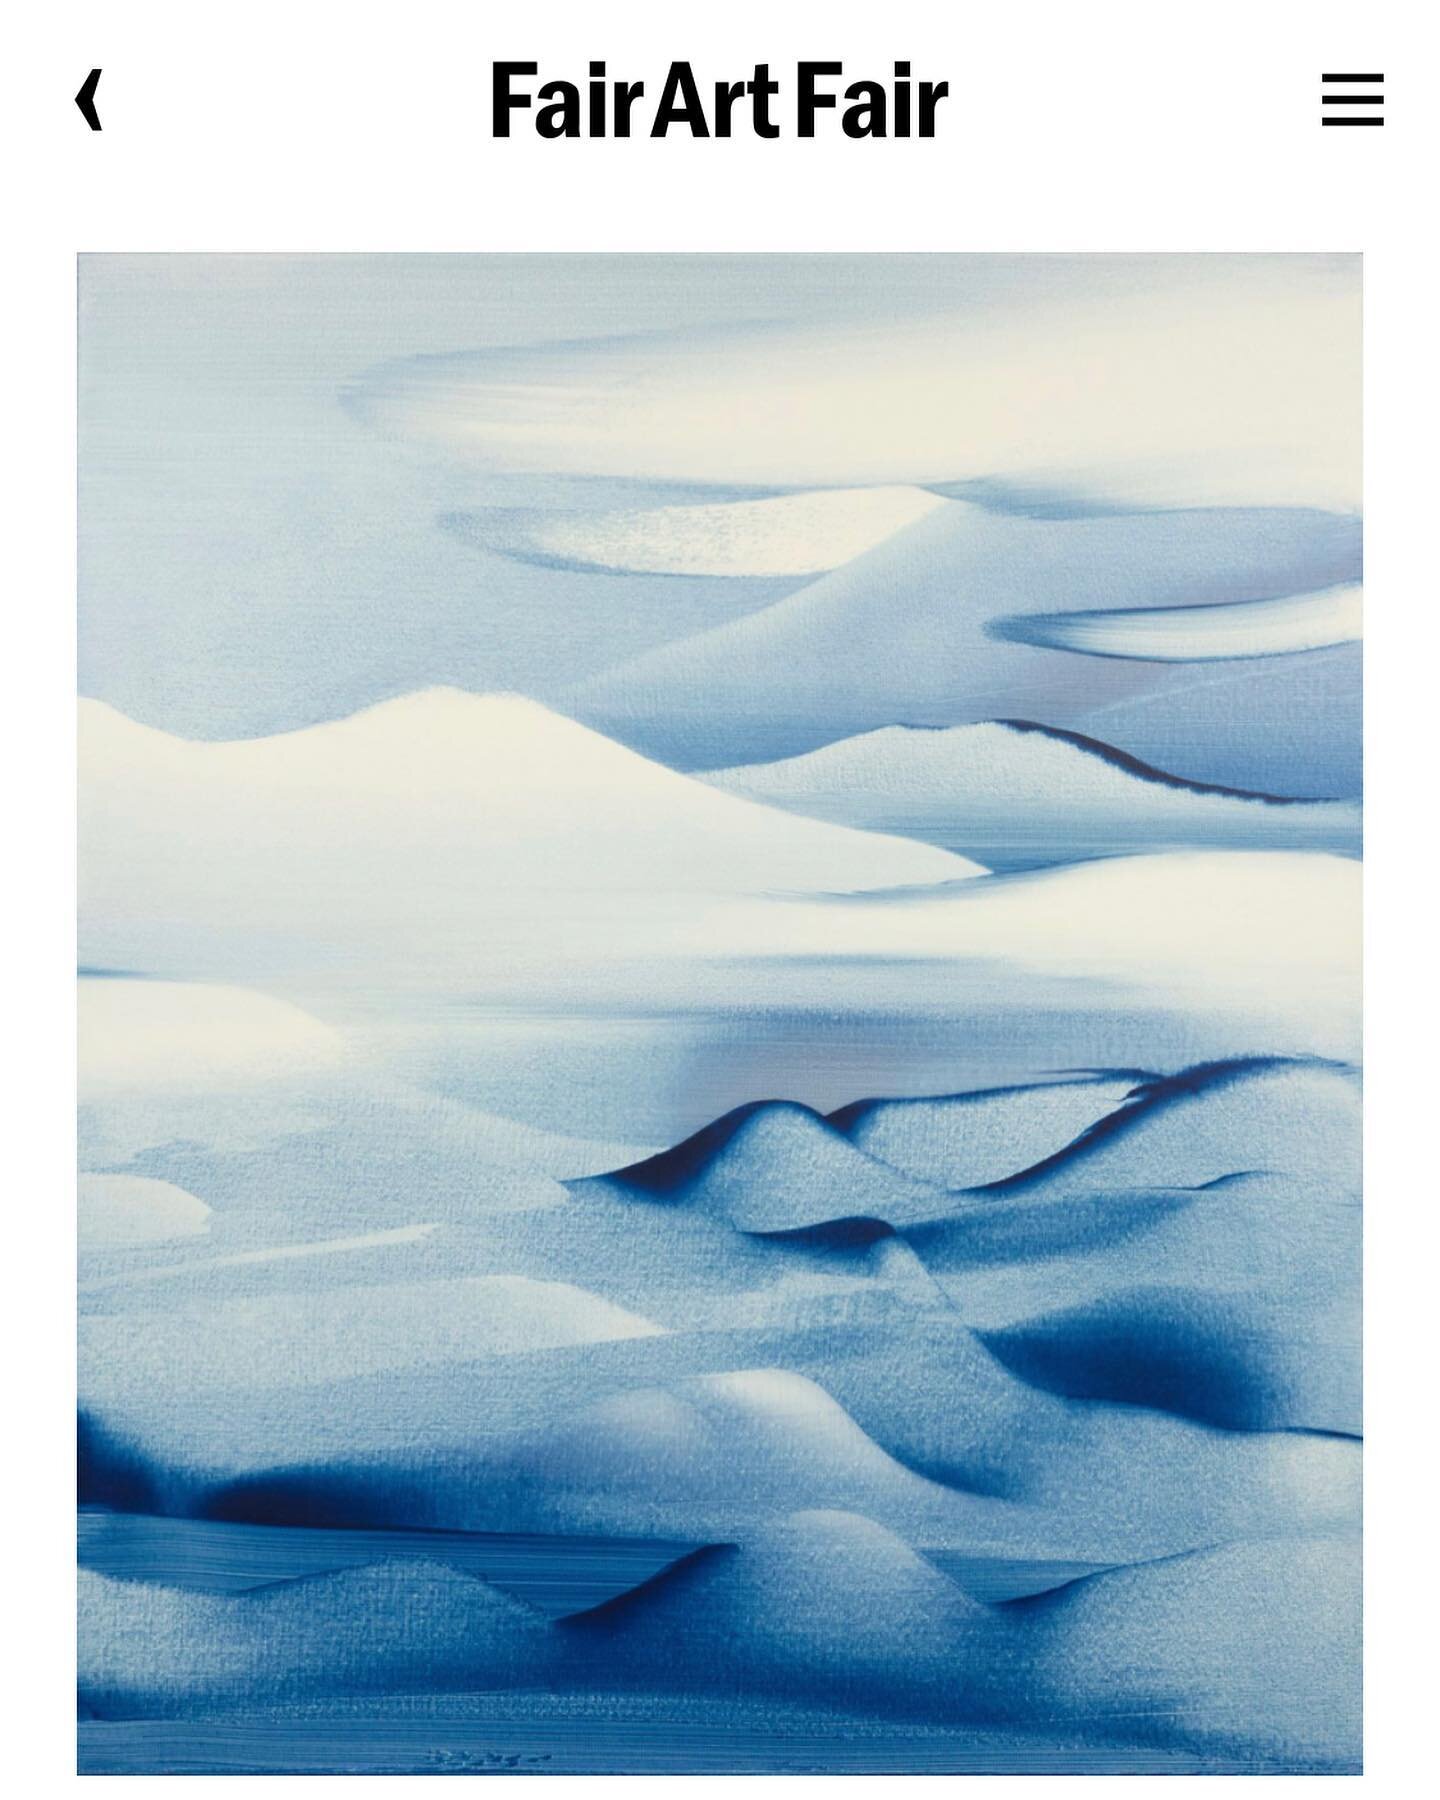 Pleased to share that you can find me and my work on the @fairartfair.art app - an exciting new way of connecting artists, collectors and curators! 

My painting &lsquo;Undulations&rsquo; (acrylic on canvas, 85cm x 100cm) is their artwork of the week